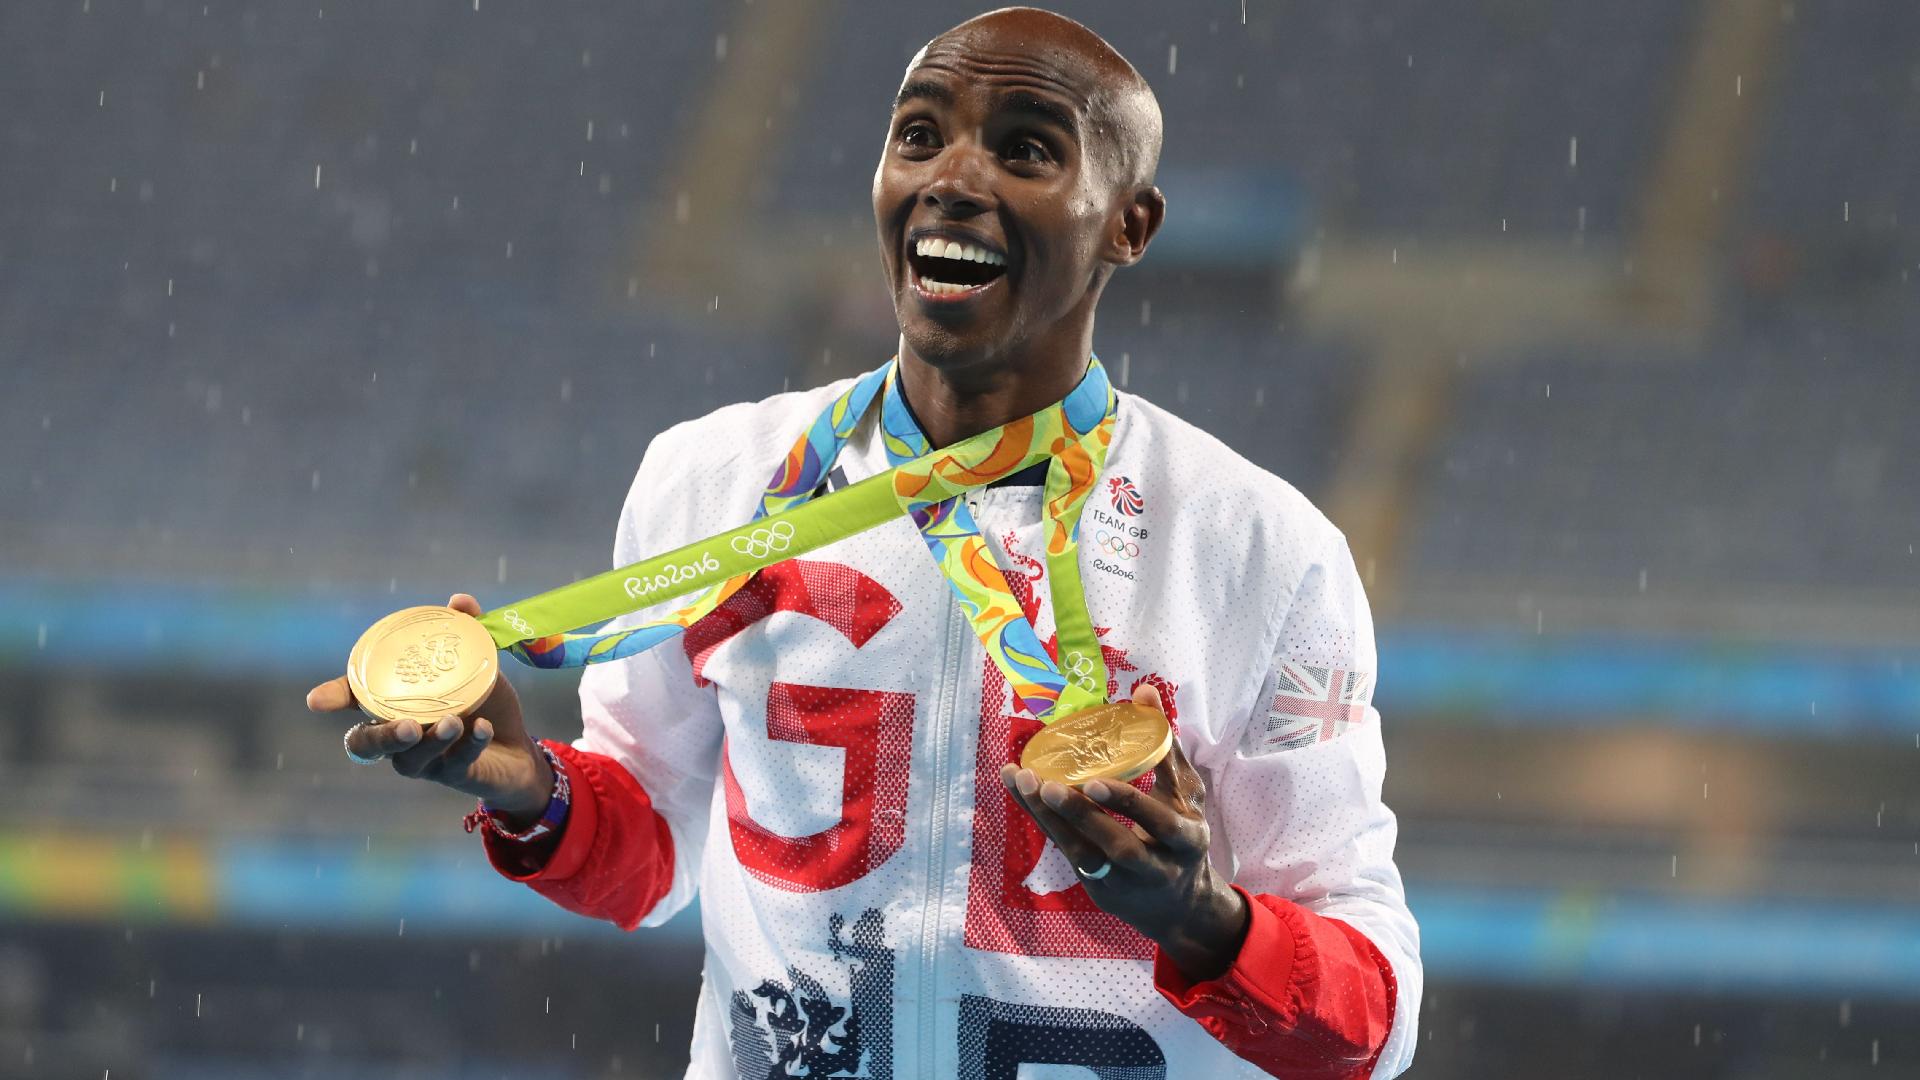 World Athletics announce £1.89m prize pot for Paris track and field gold medals